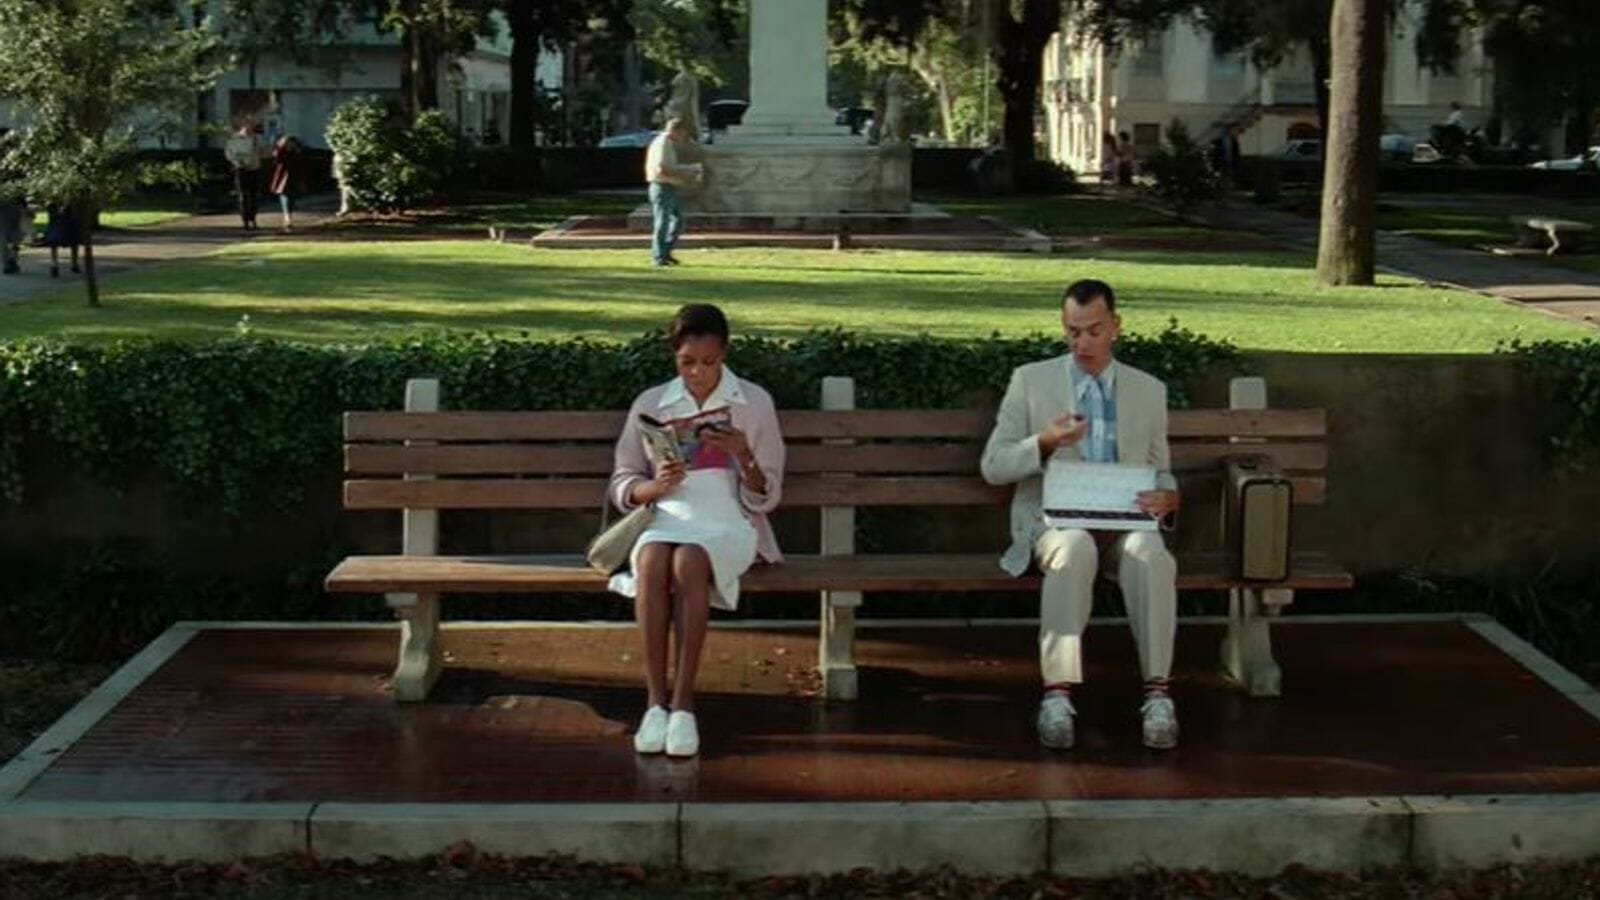 Best Meaningful Movie: Forrest Gump (1994)